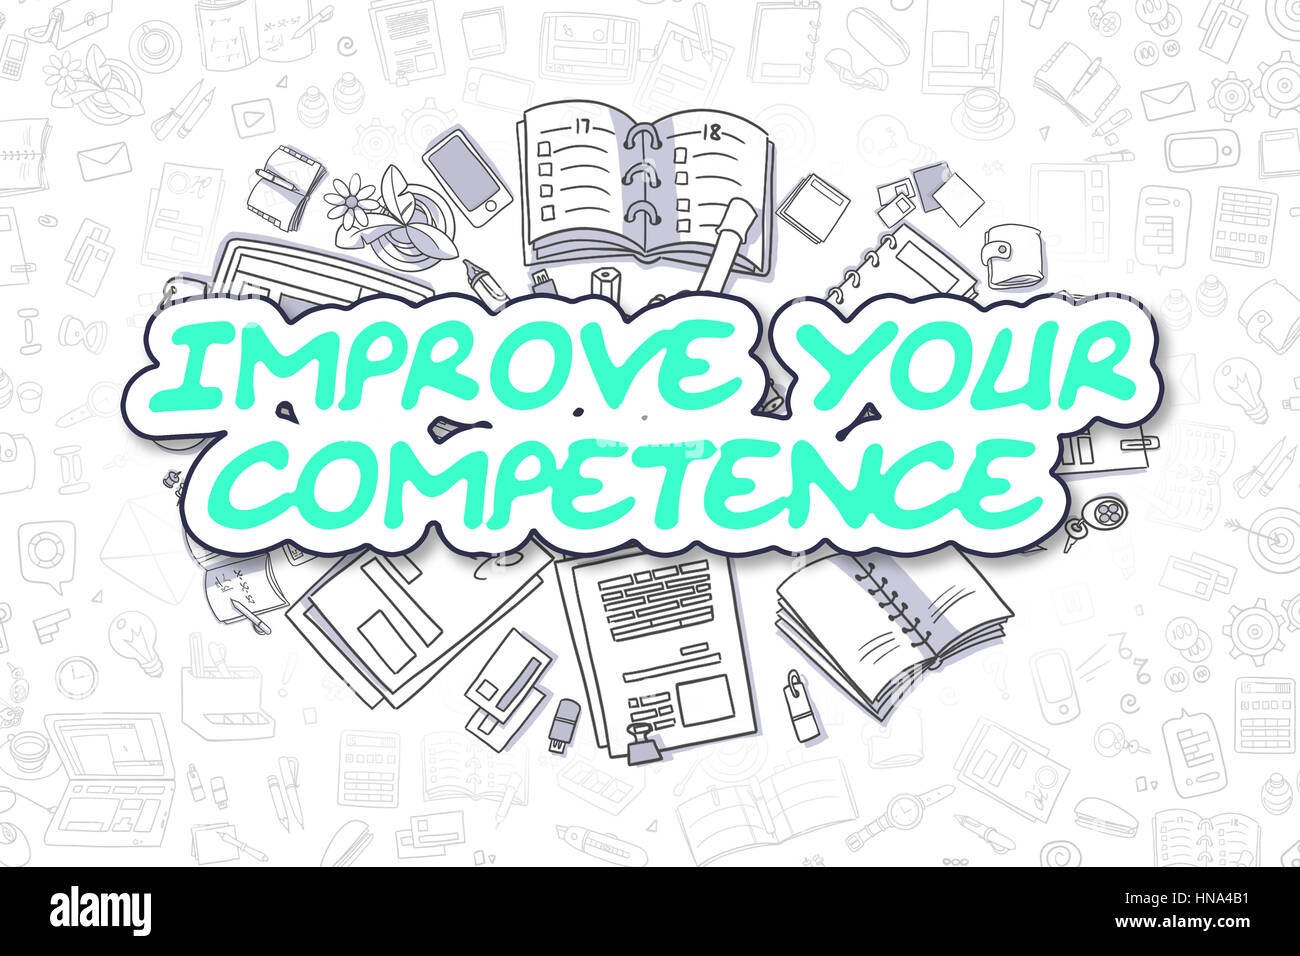 Improve Your Competence - Business Concept. Stock Photo